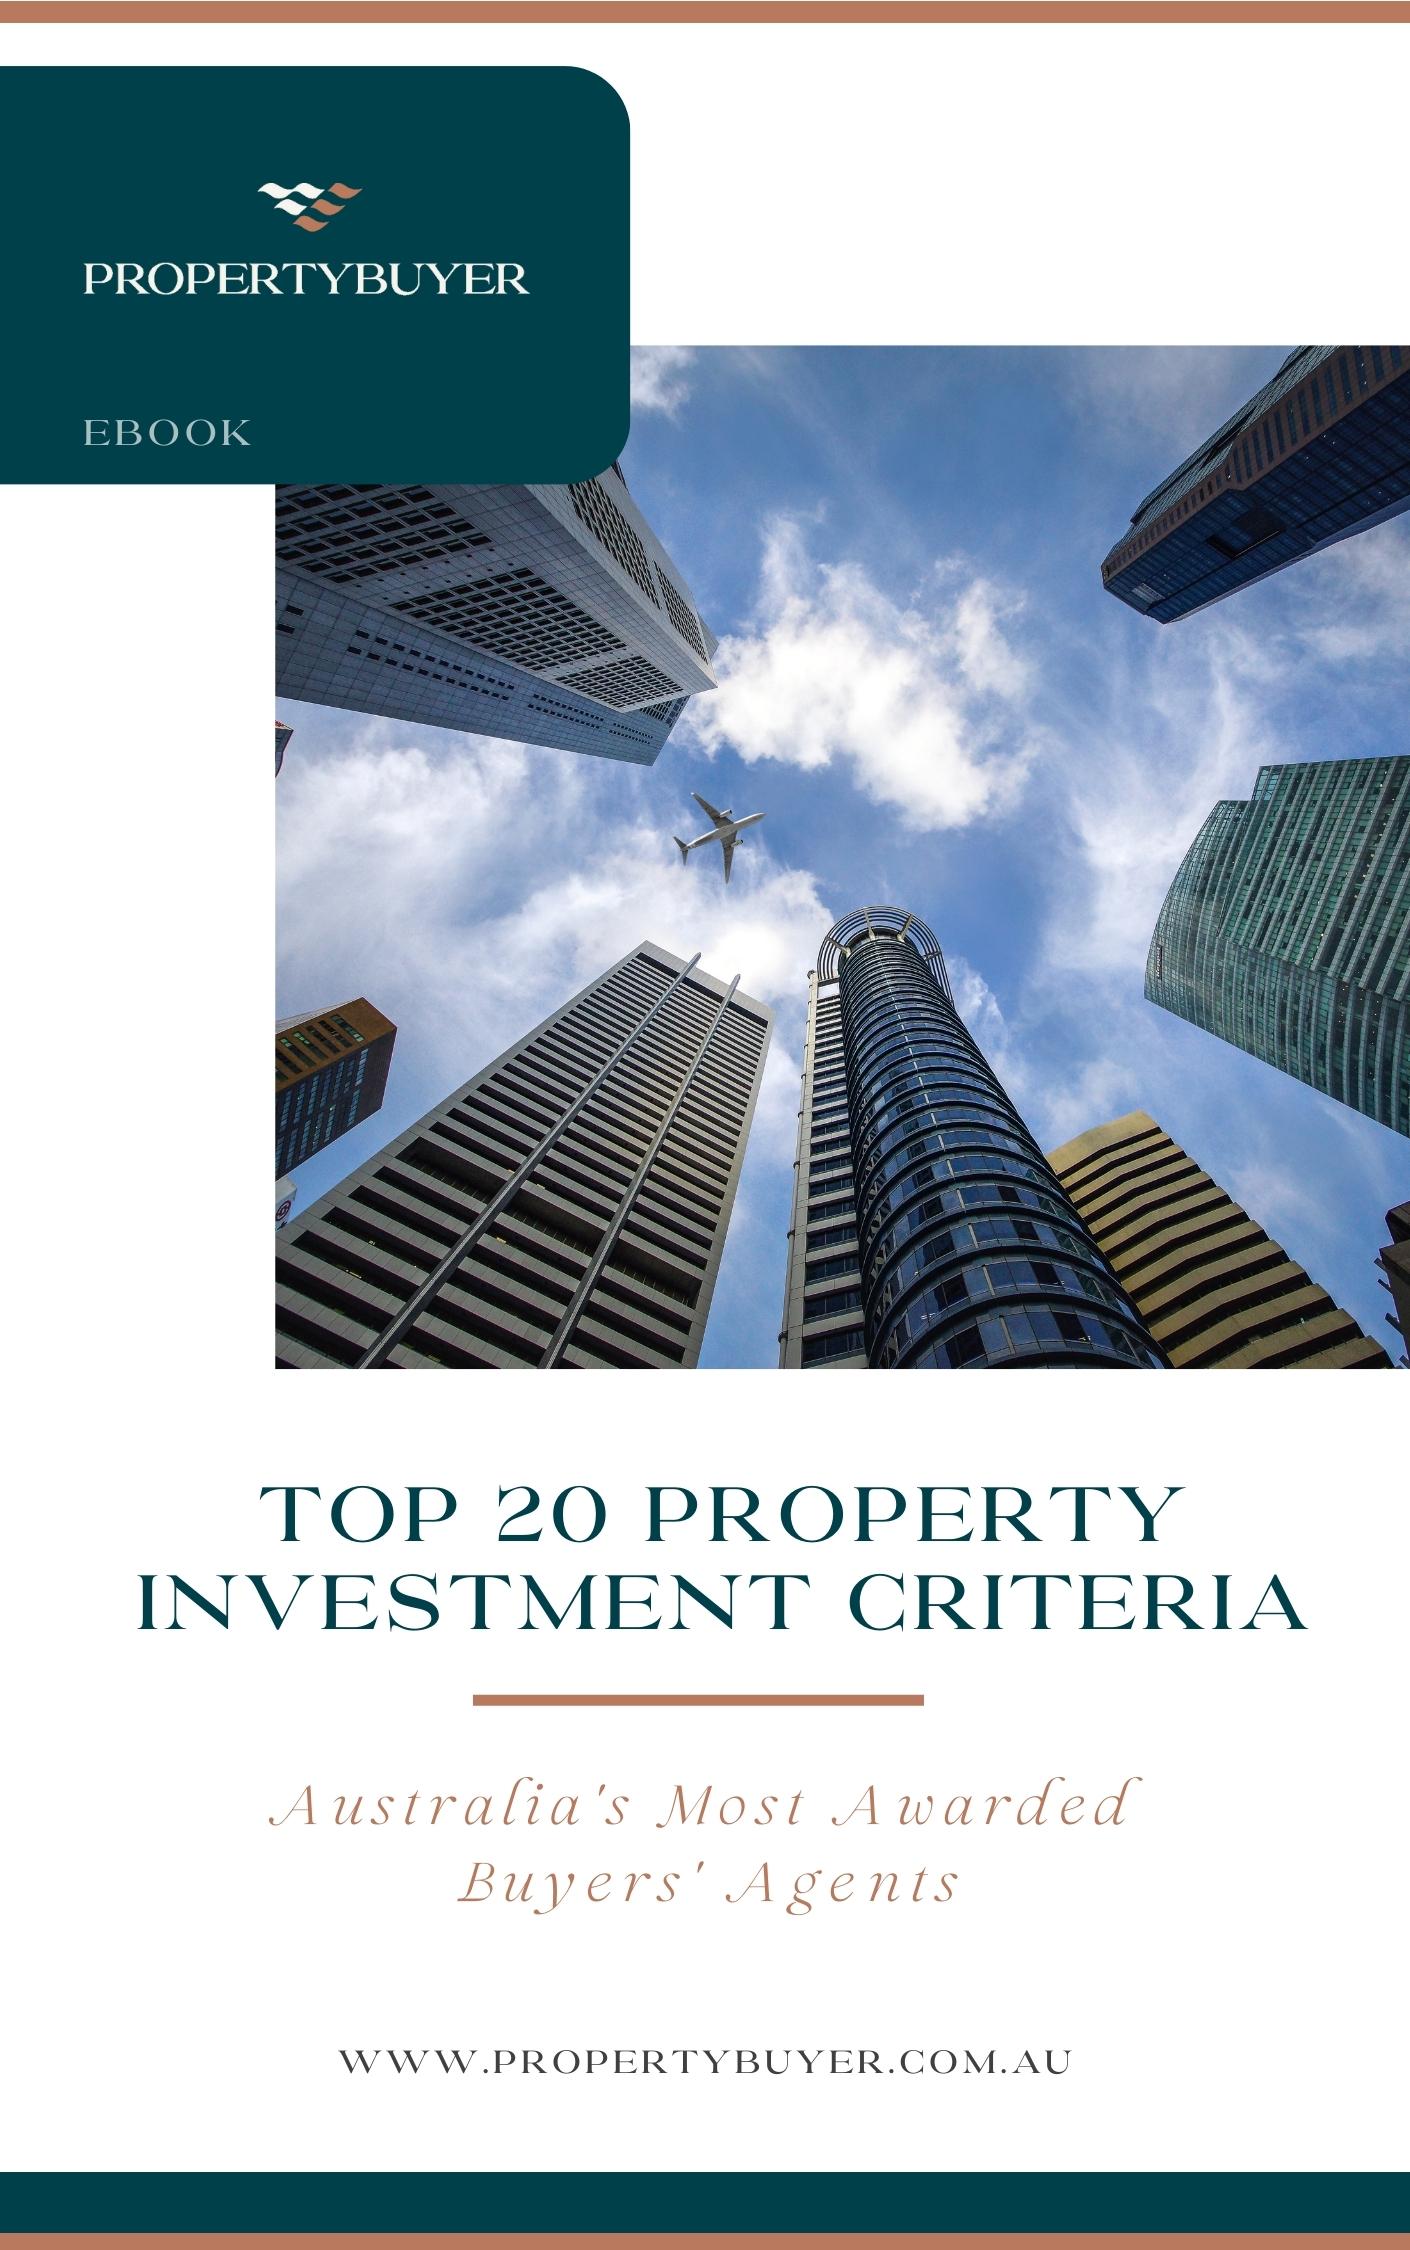 Top 20 Property Investment Criteria